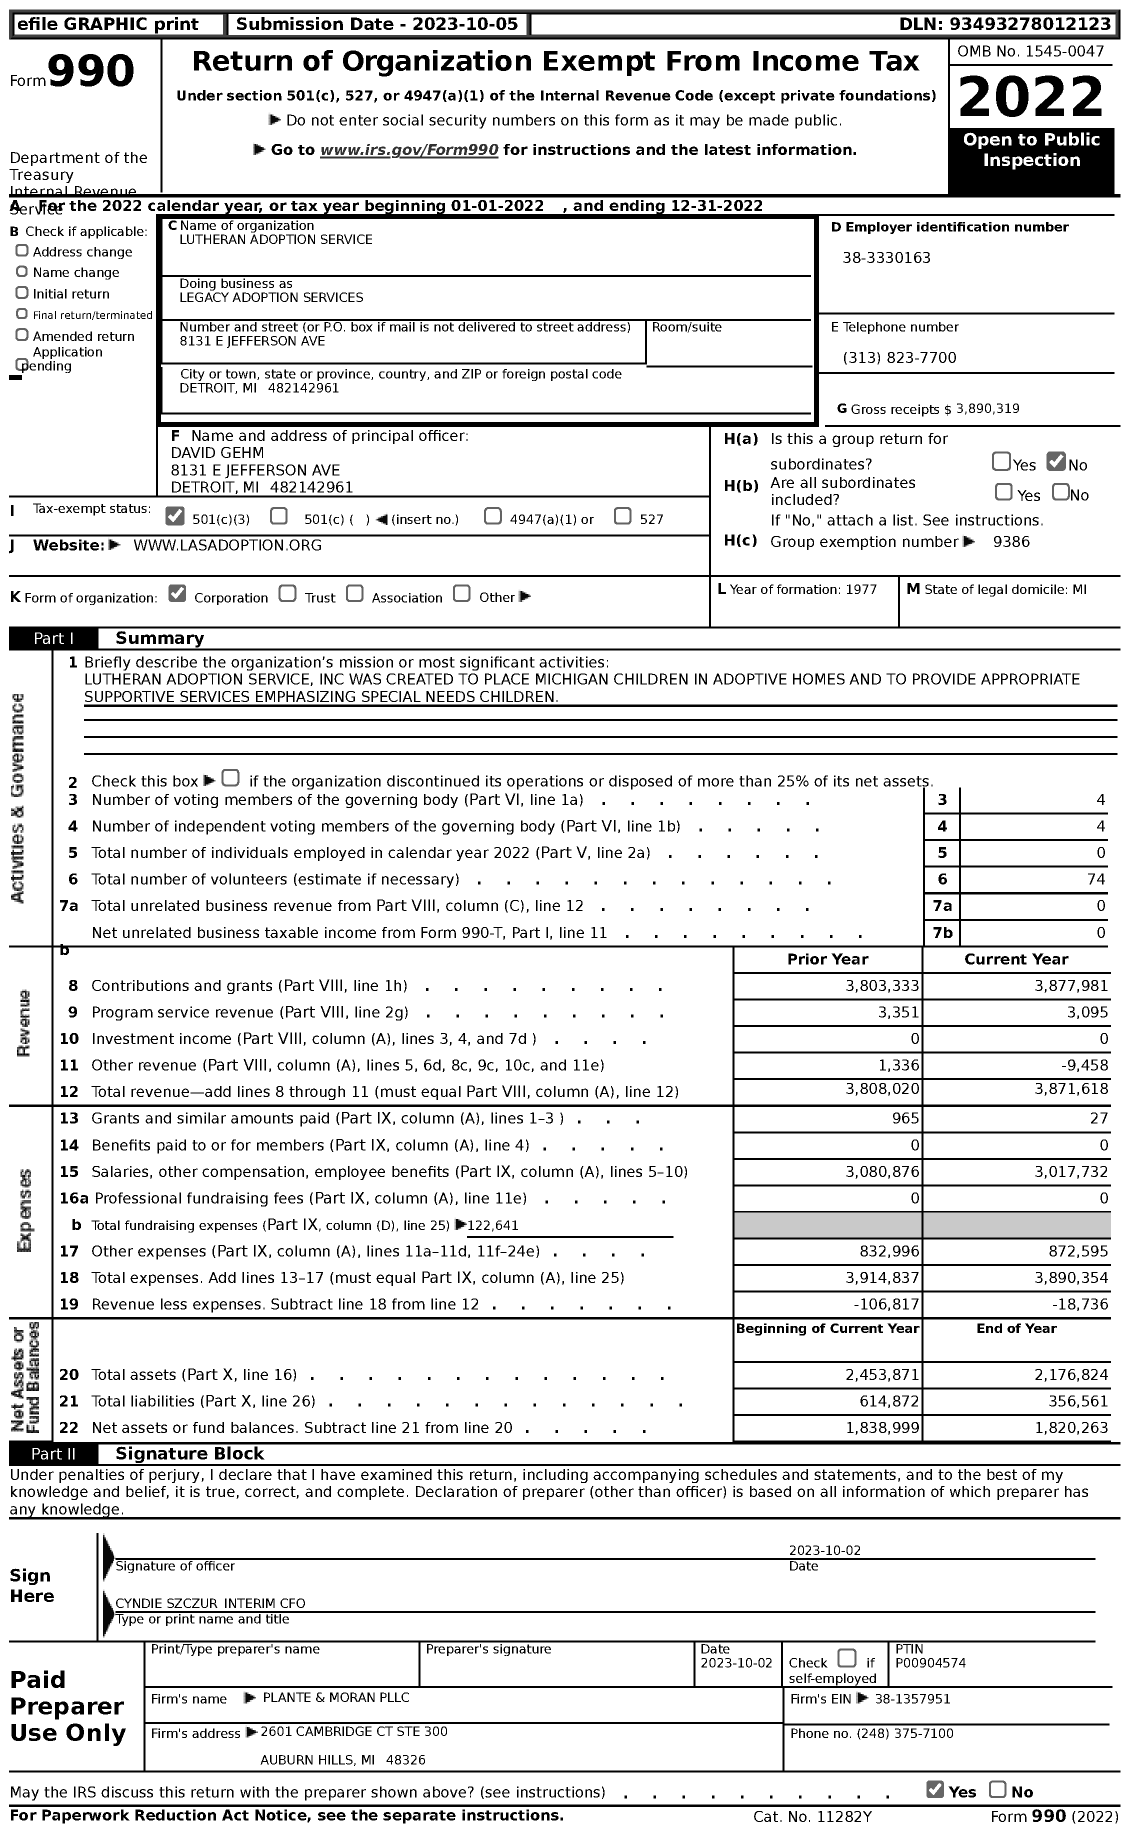 Image of first page of 2022 Form 990 for Legacy Adoption Services